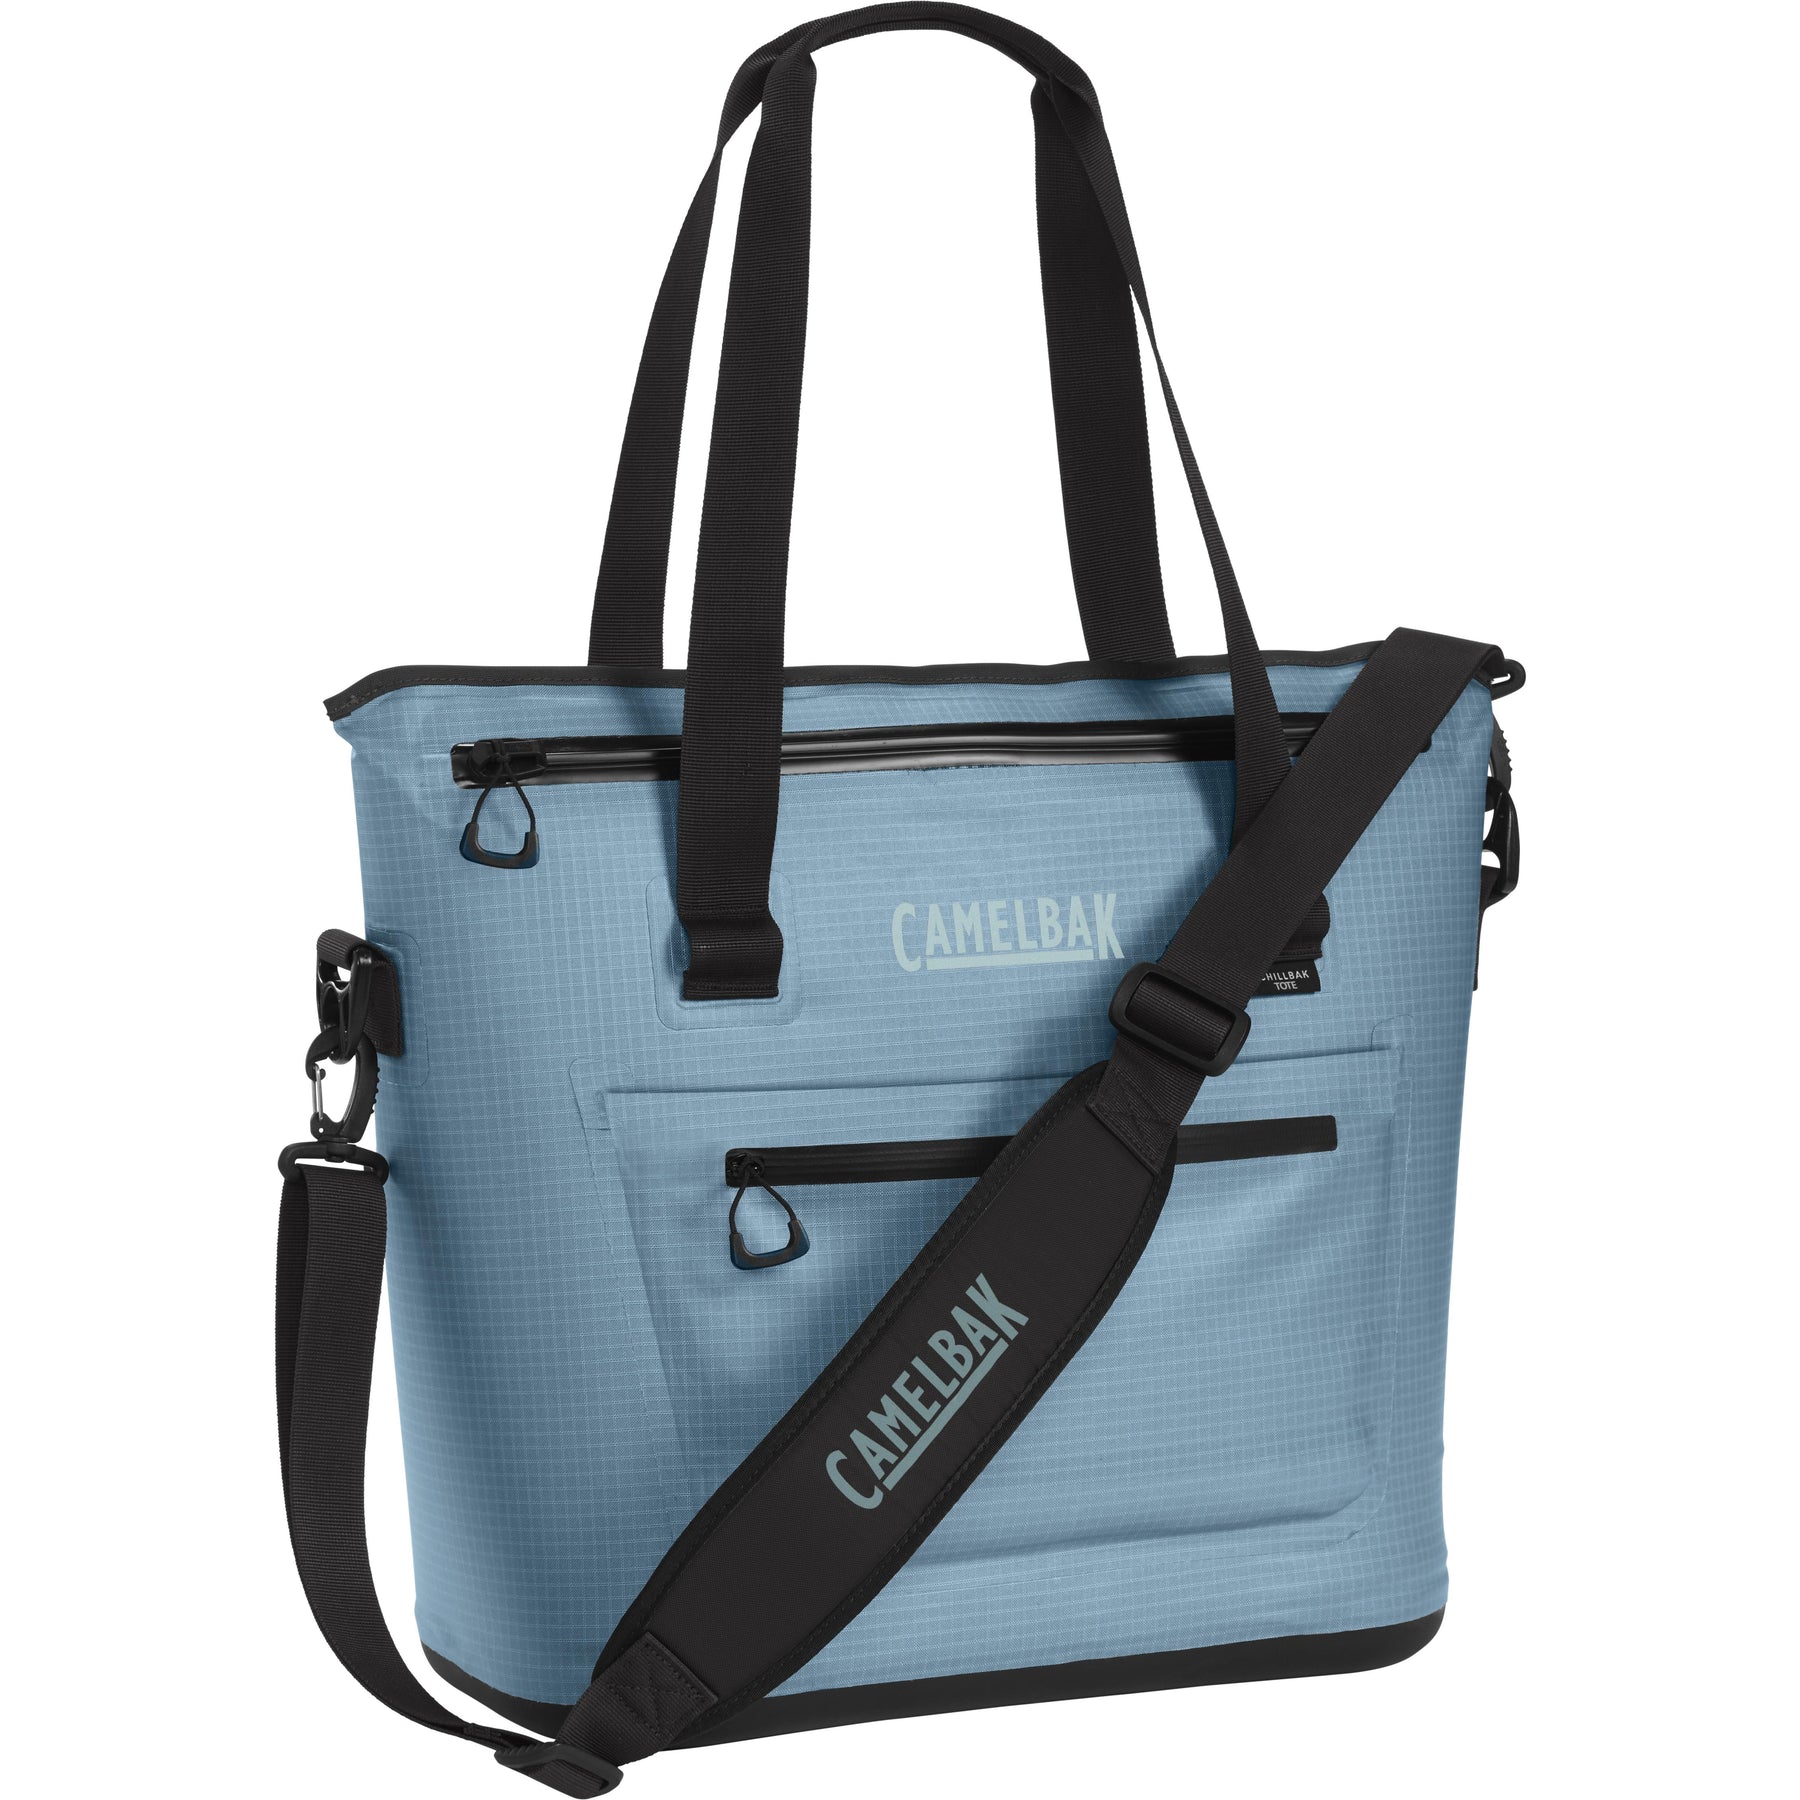 Camelbak Tote 18 Fusion 3L Group Hydration Pack